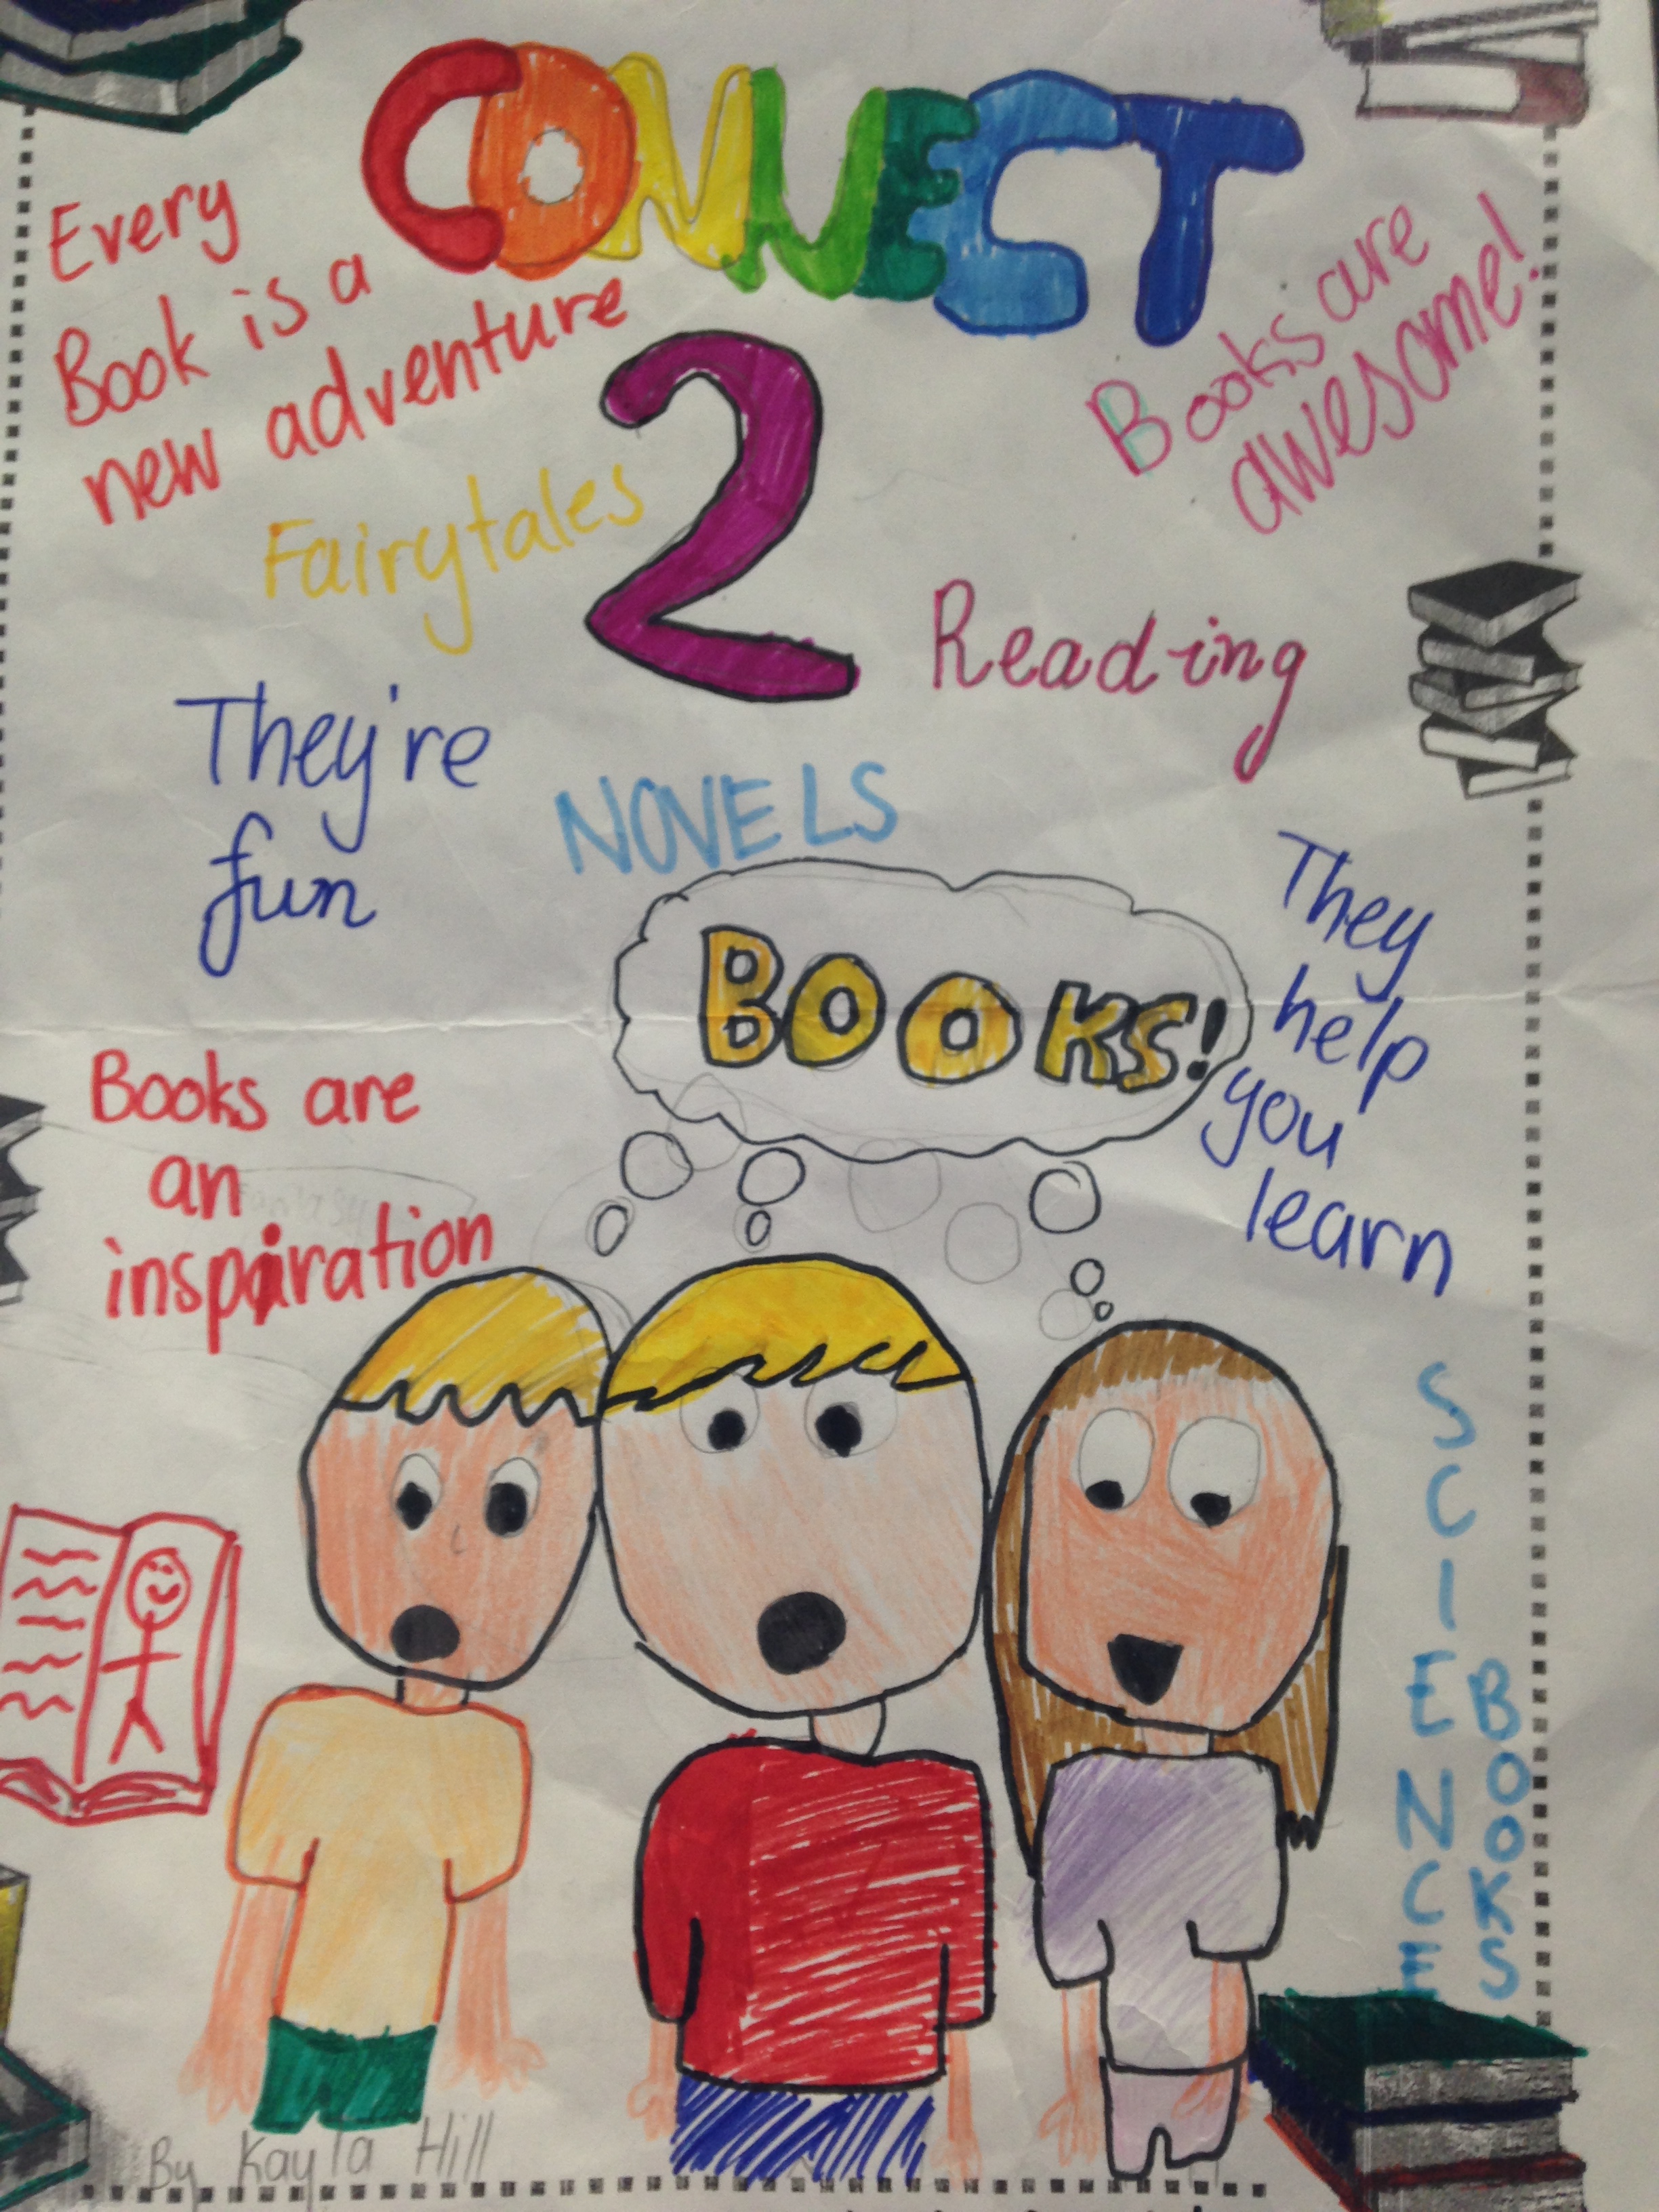 Student created book week poster.
